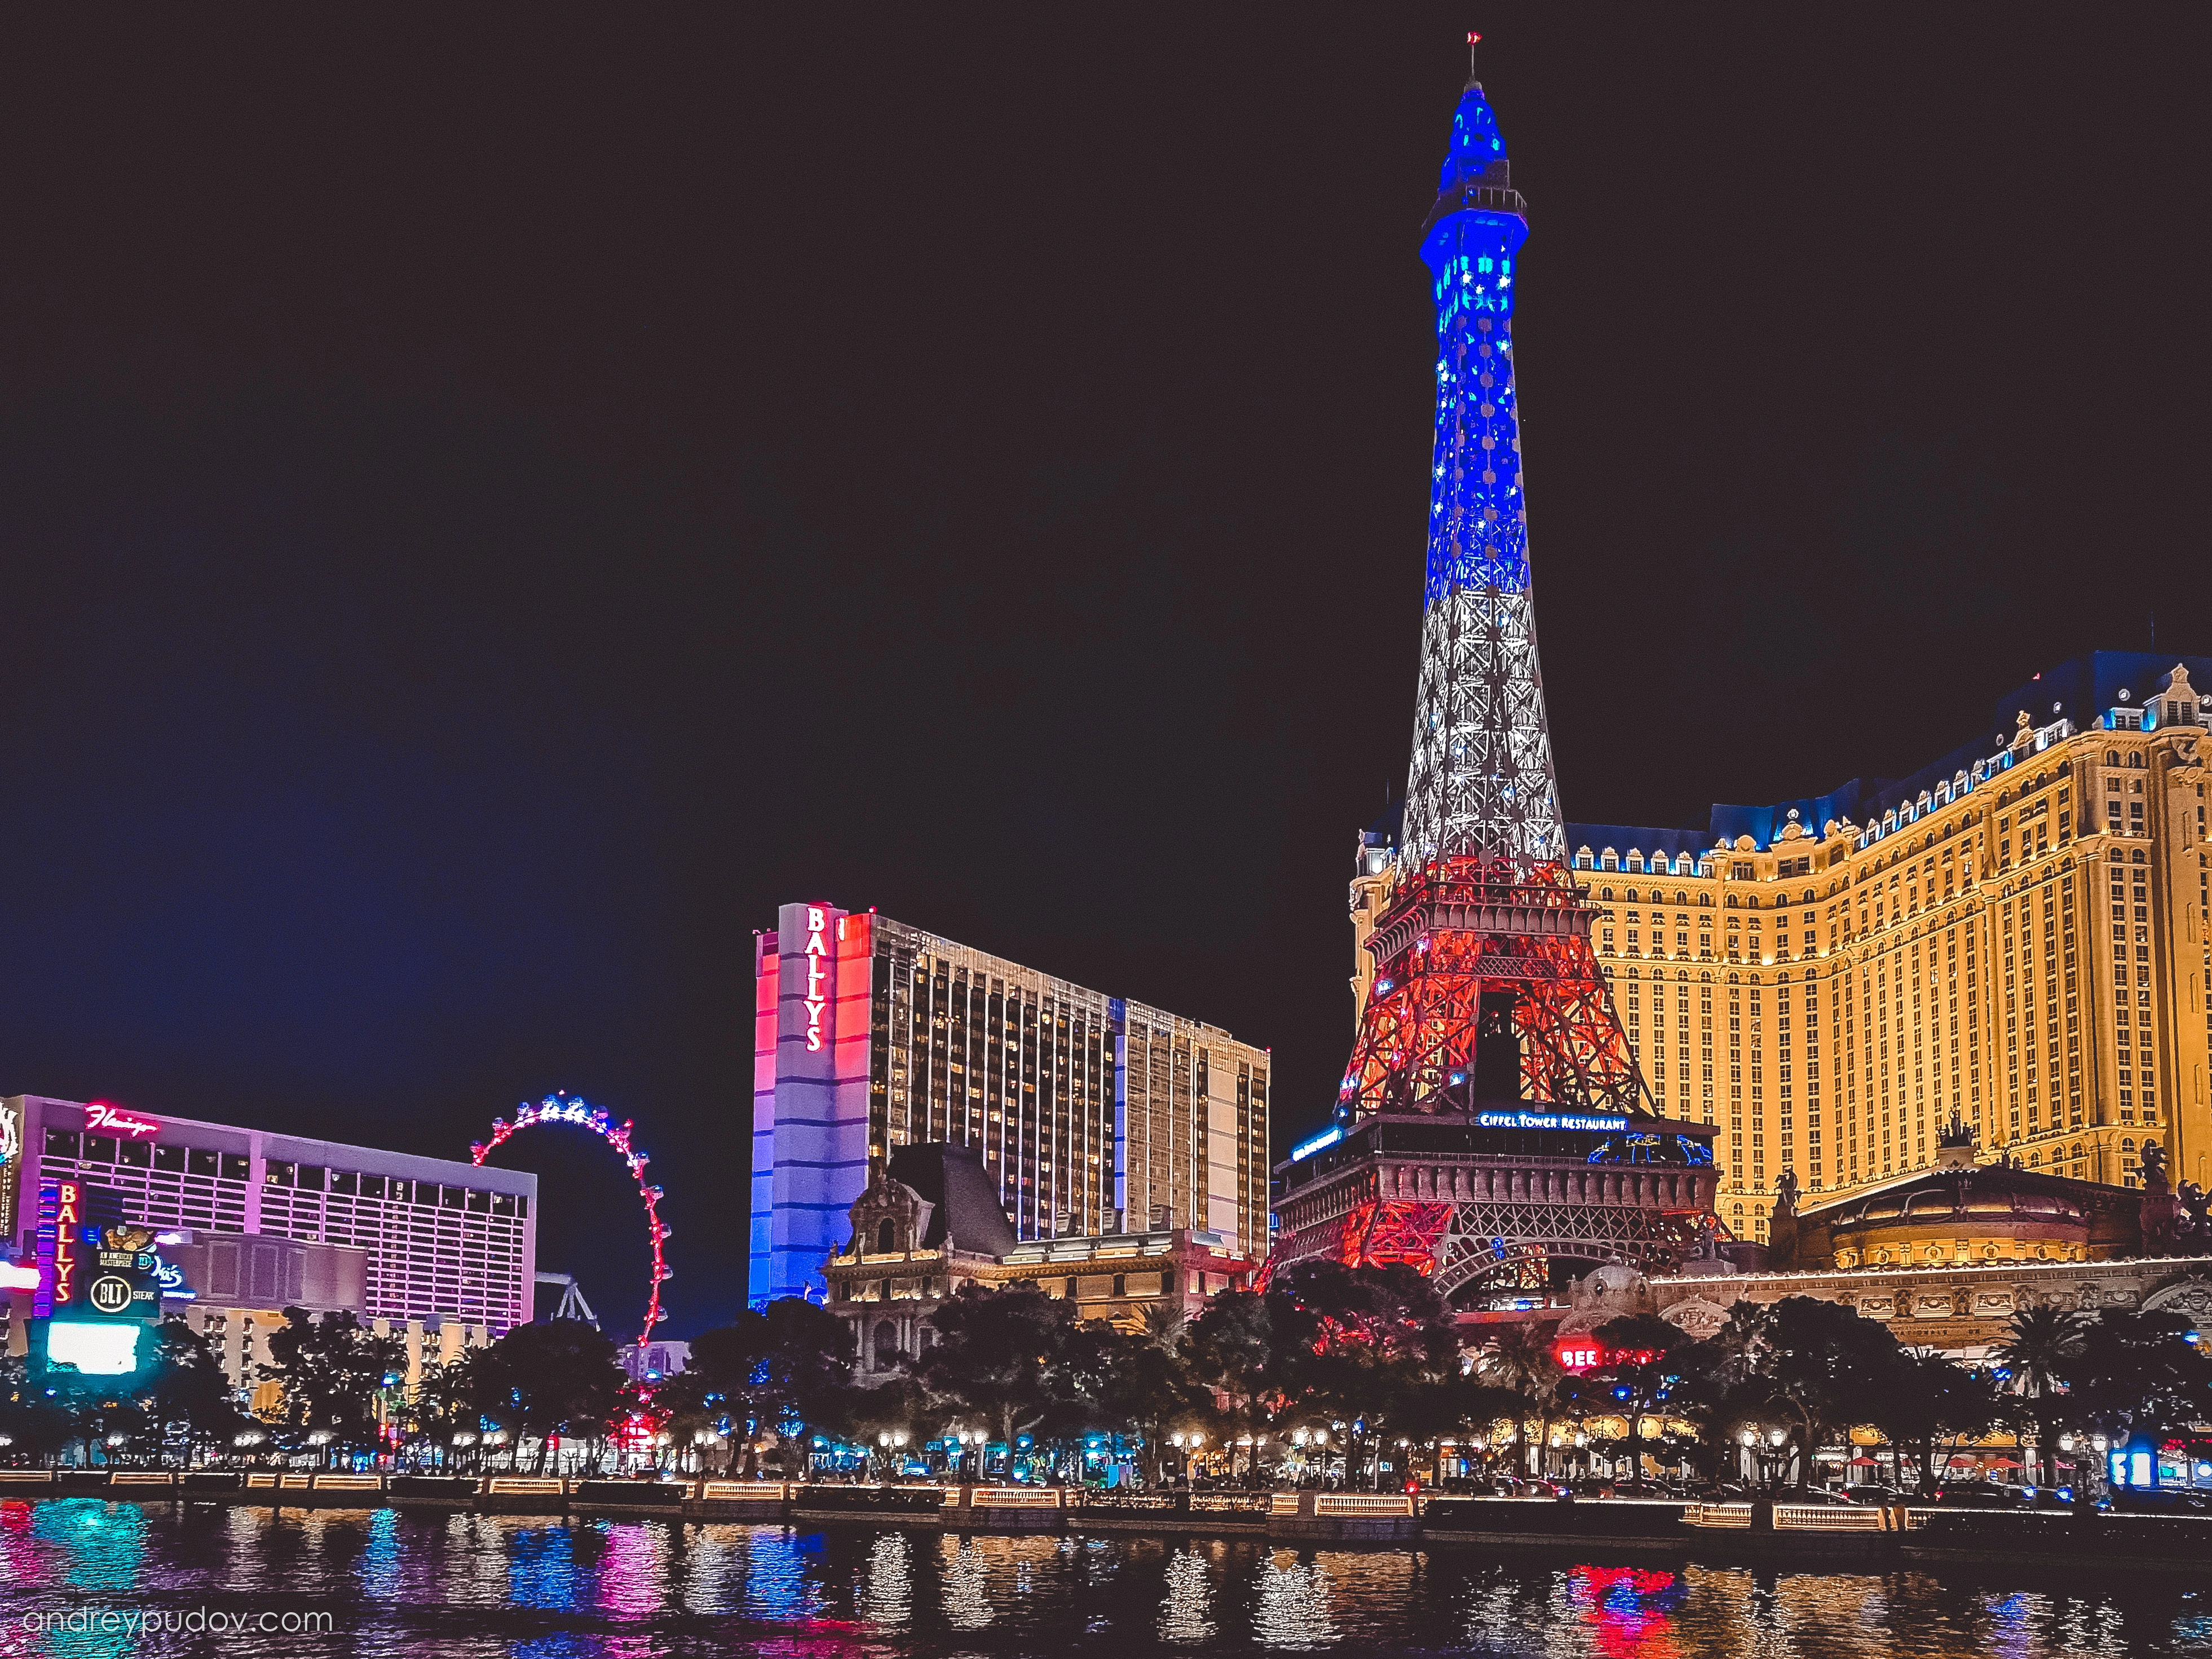 Conquering America 4.0 - Paris Las Vegas

Paris Las Vegas is a casino hotel on the Las Vegas Strip in Paradise. It is owned and operated by Caesars Entertainment and has a 95,263 square-foot casino with over 1,700 slot machines.